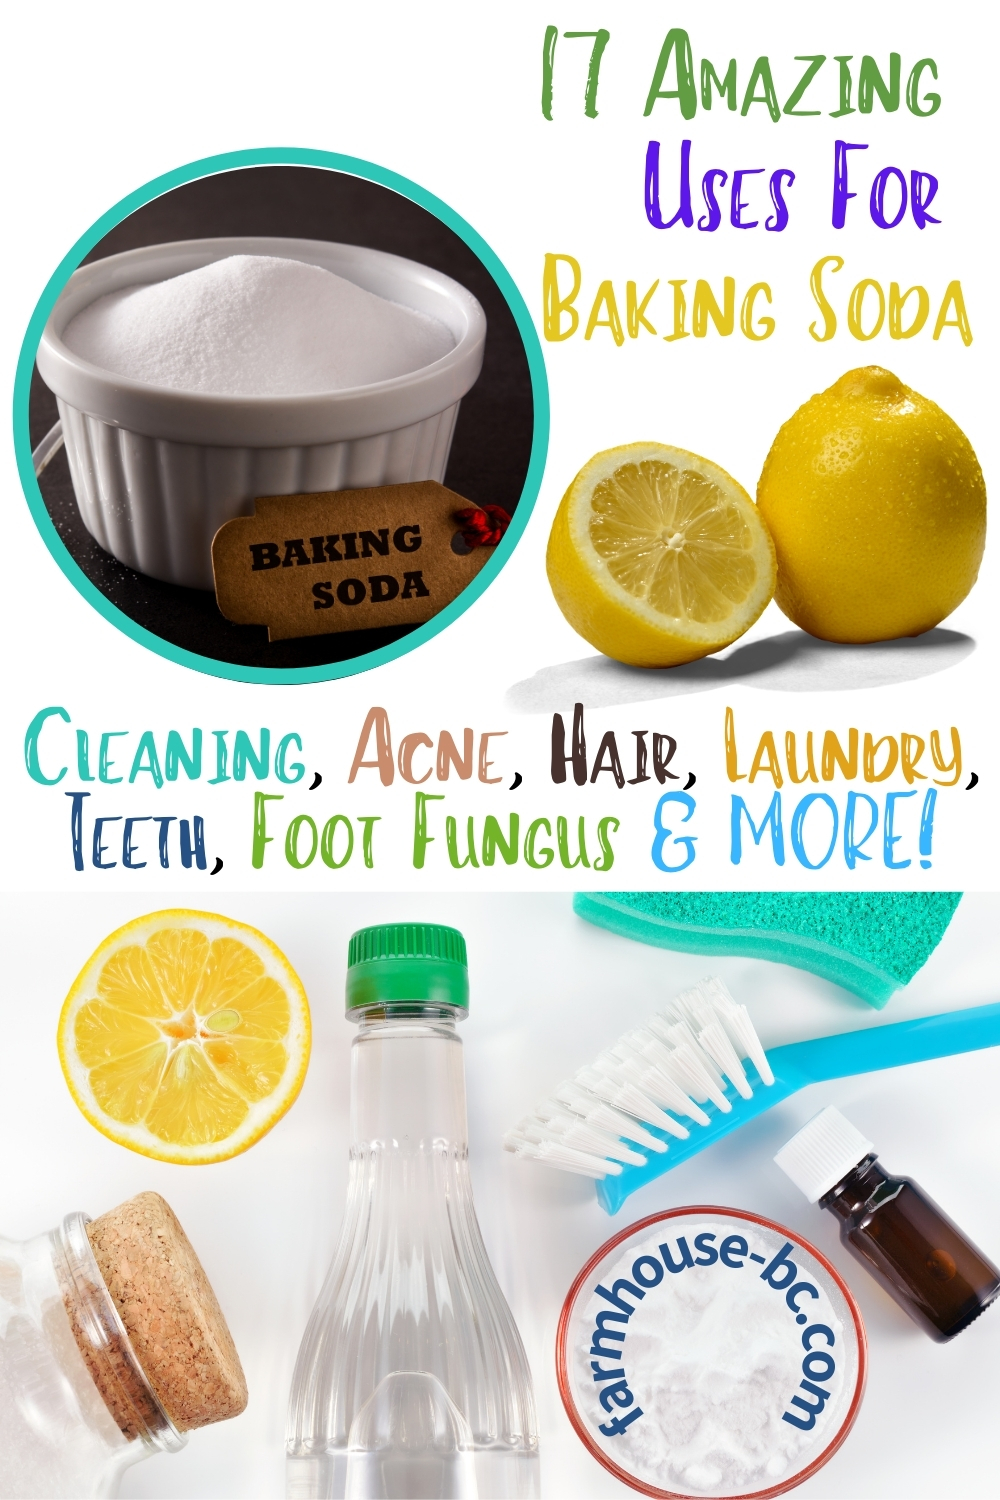 baking soda as a natural cleaner